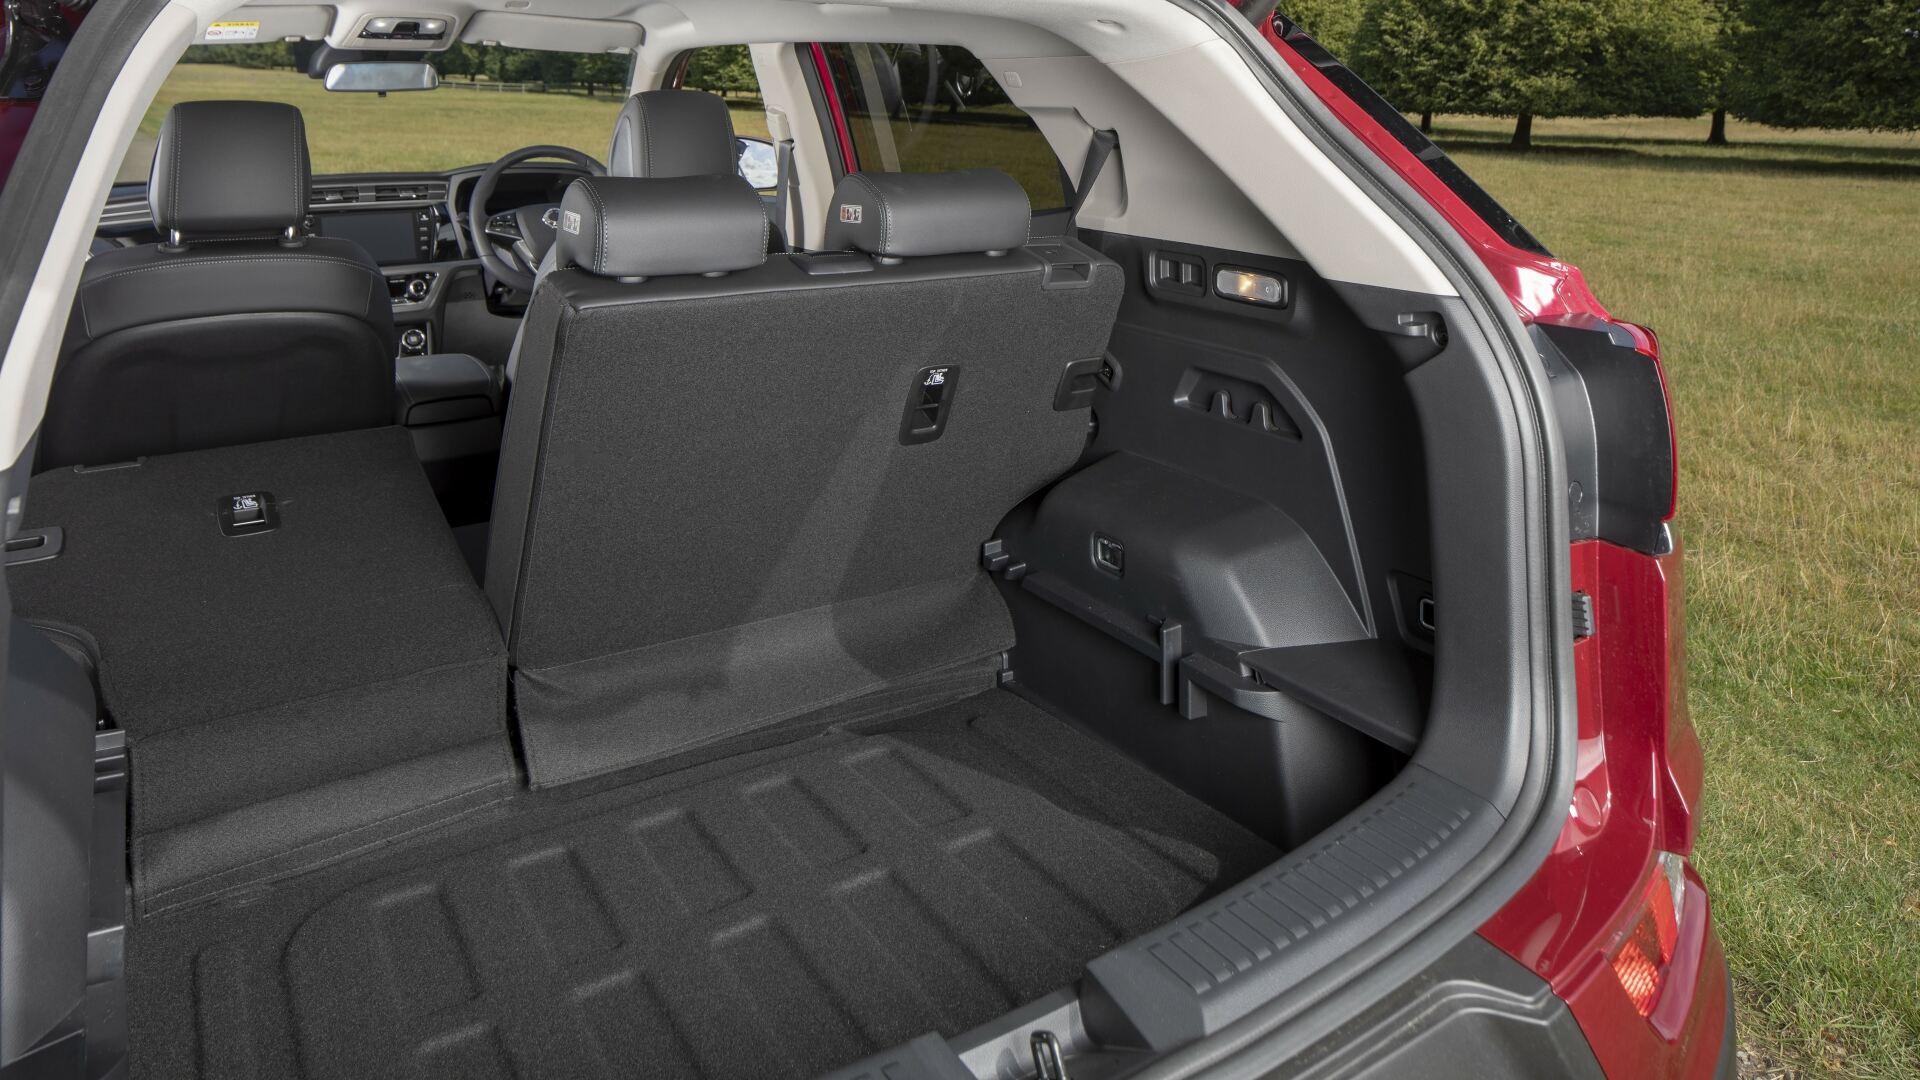 The Boot Space That Comes With A SsangYong Korando (Credits KGM Motors Media)